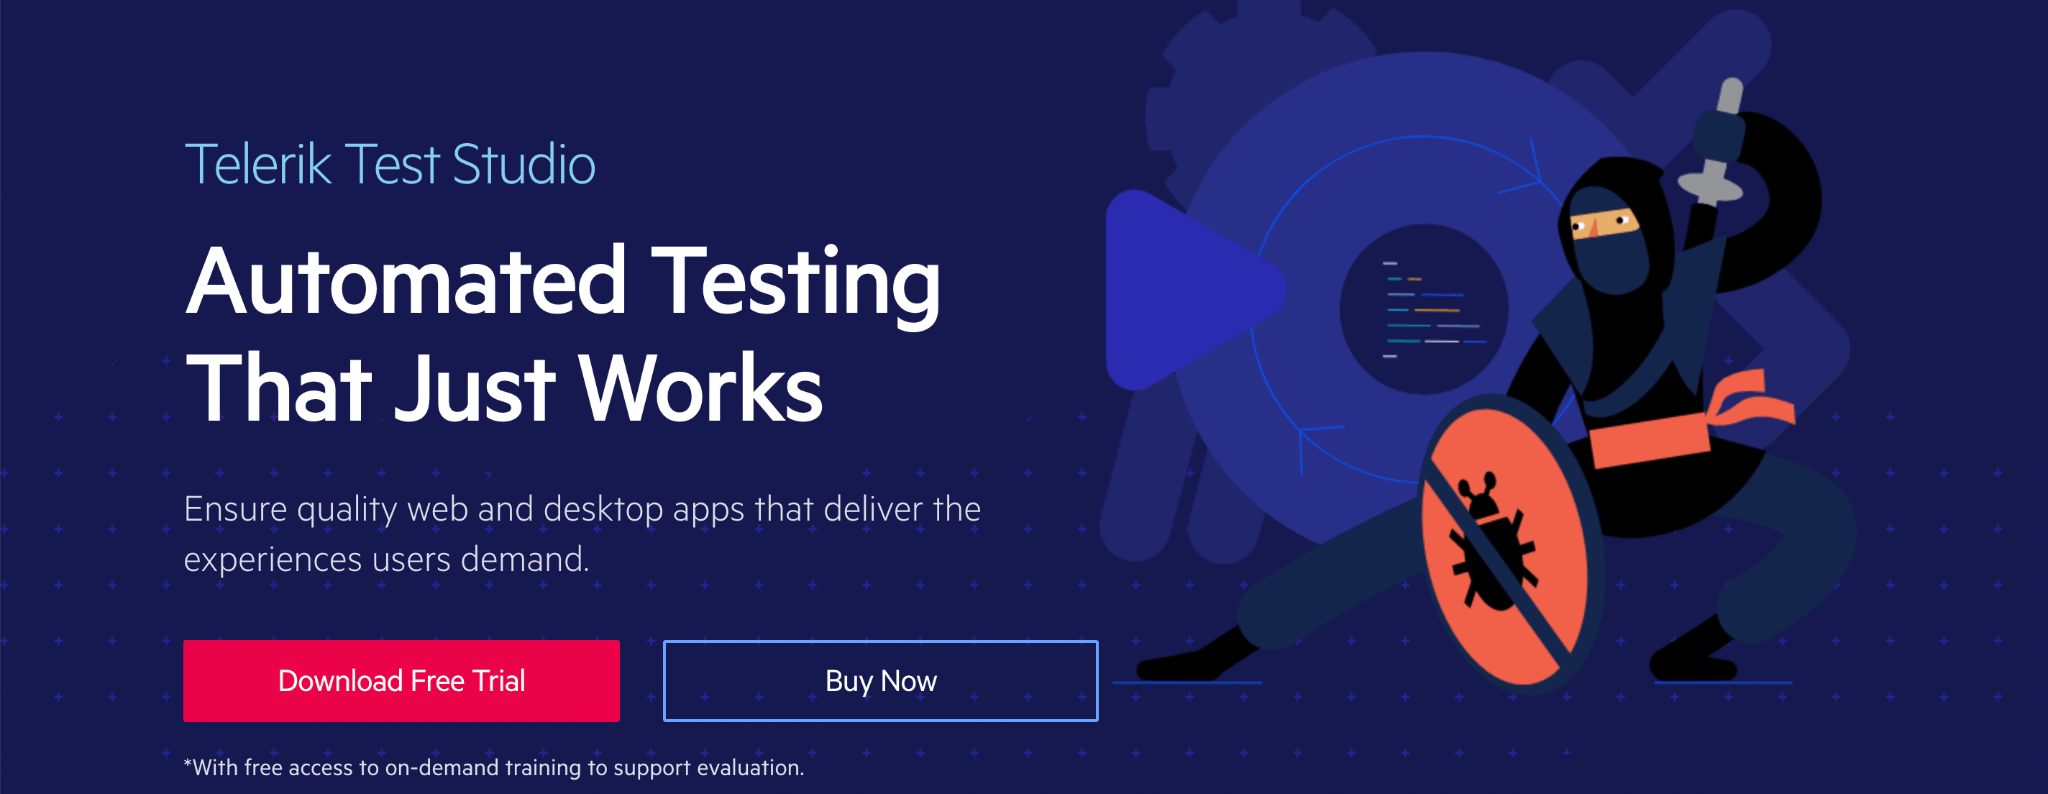 automated testing that just works